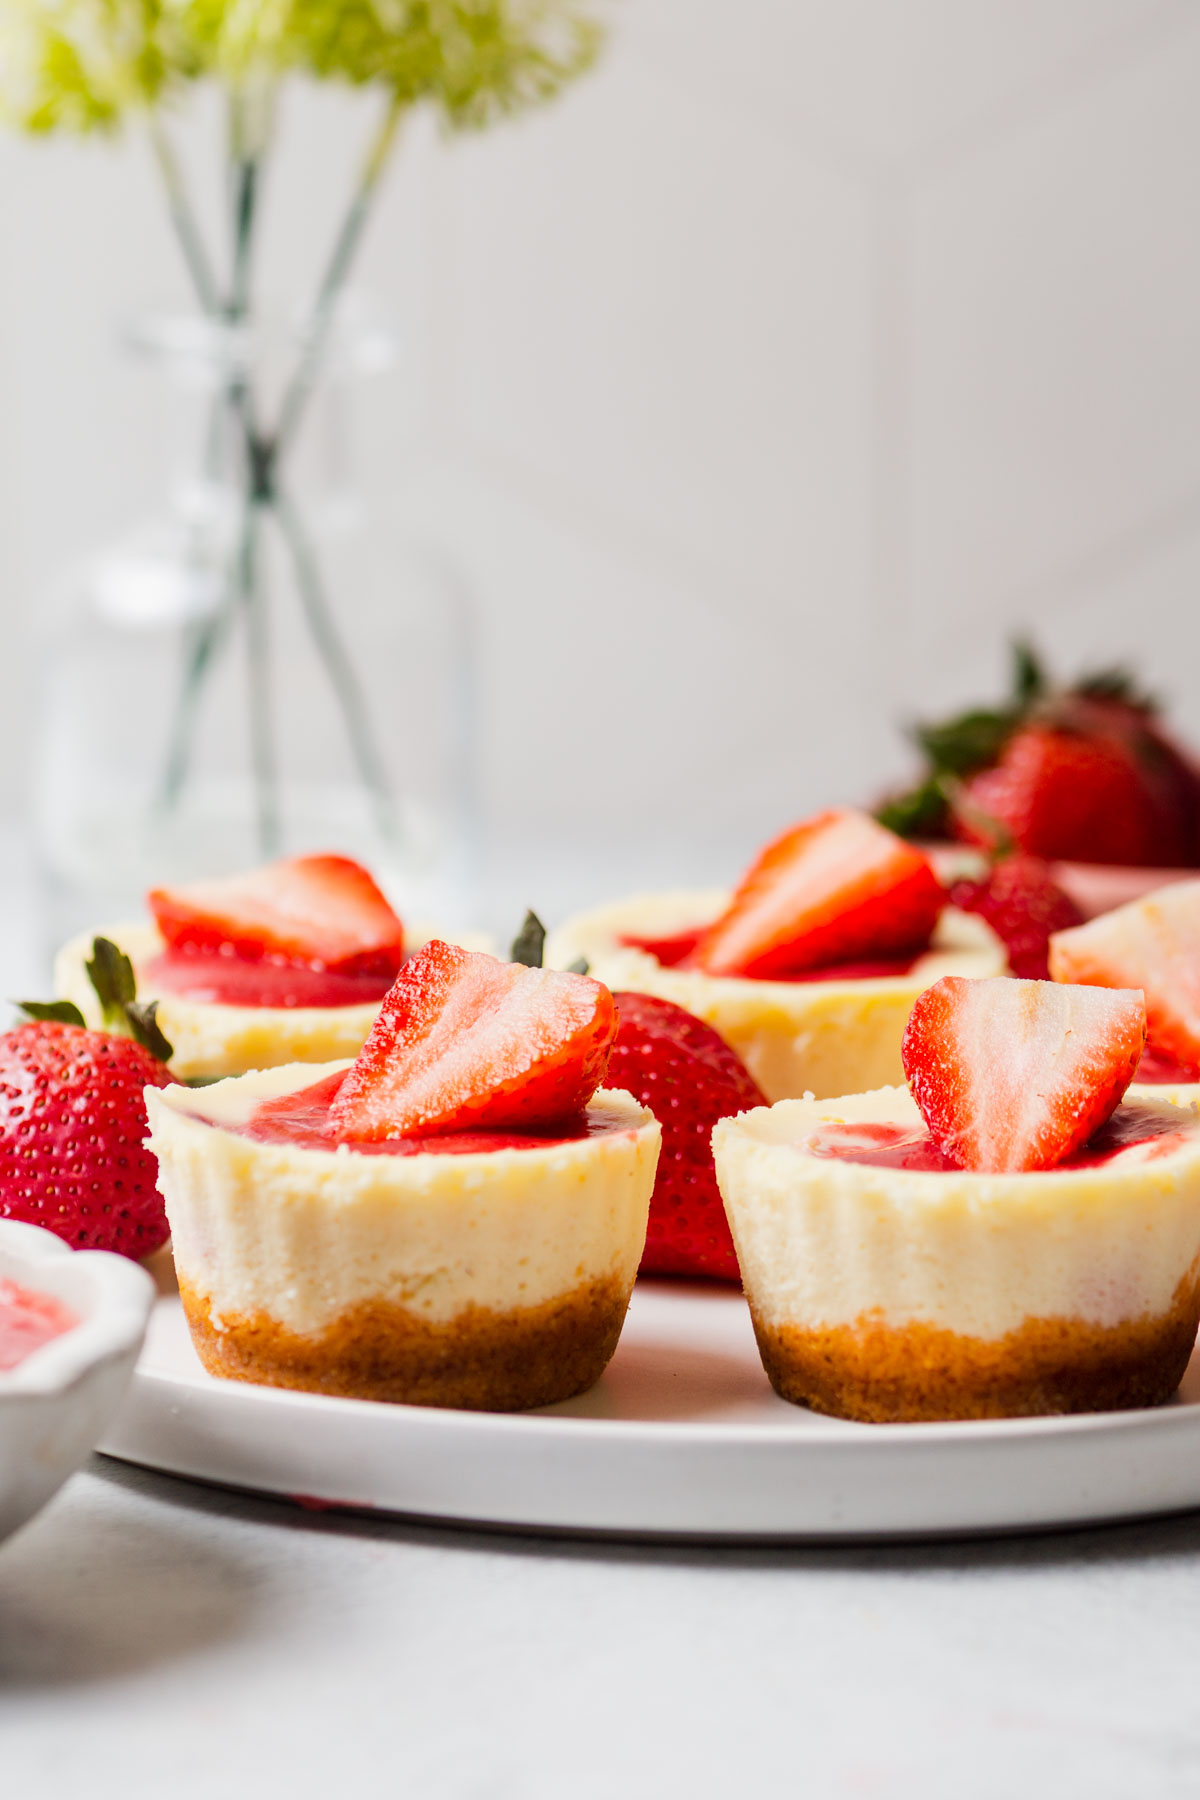 mini strawberry cheesecakes arranged on a platter against a white backdrop.